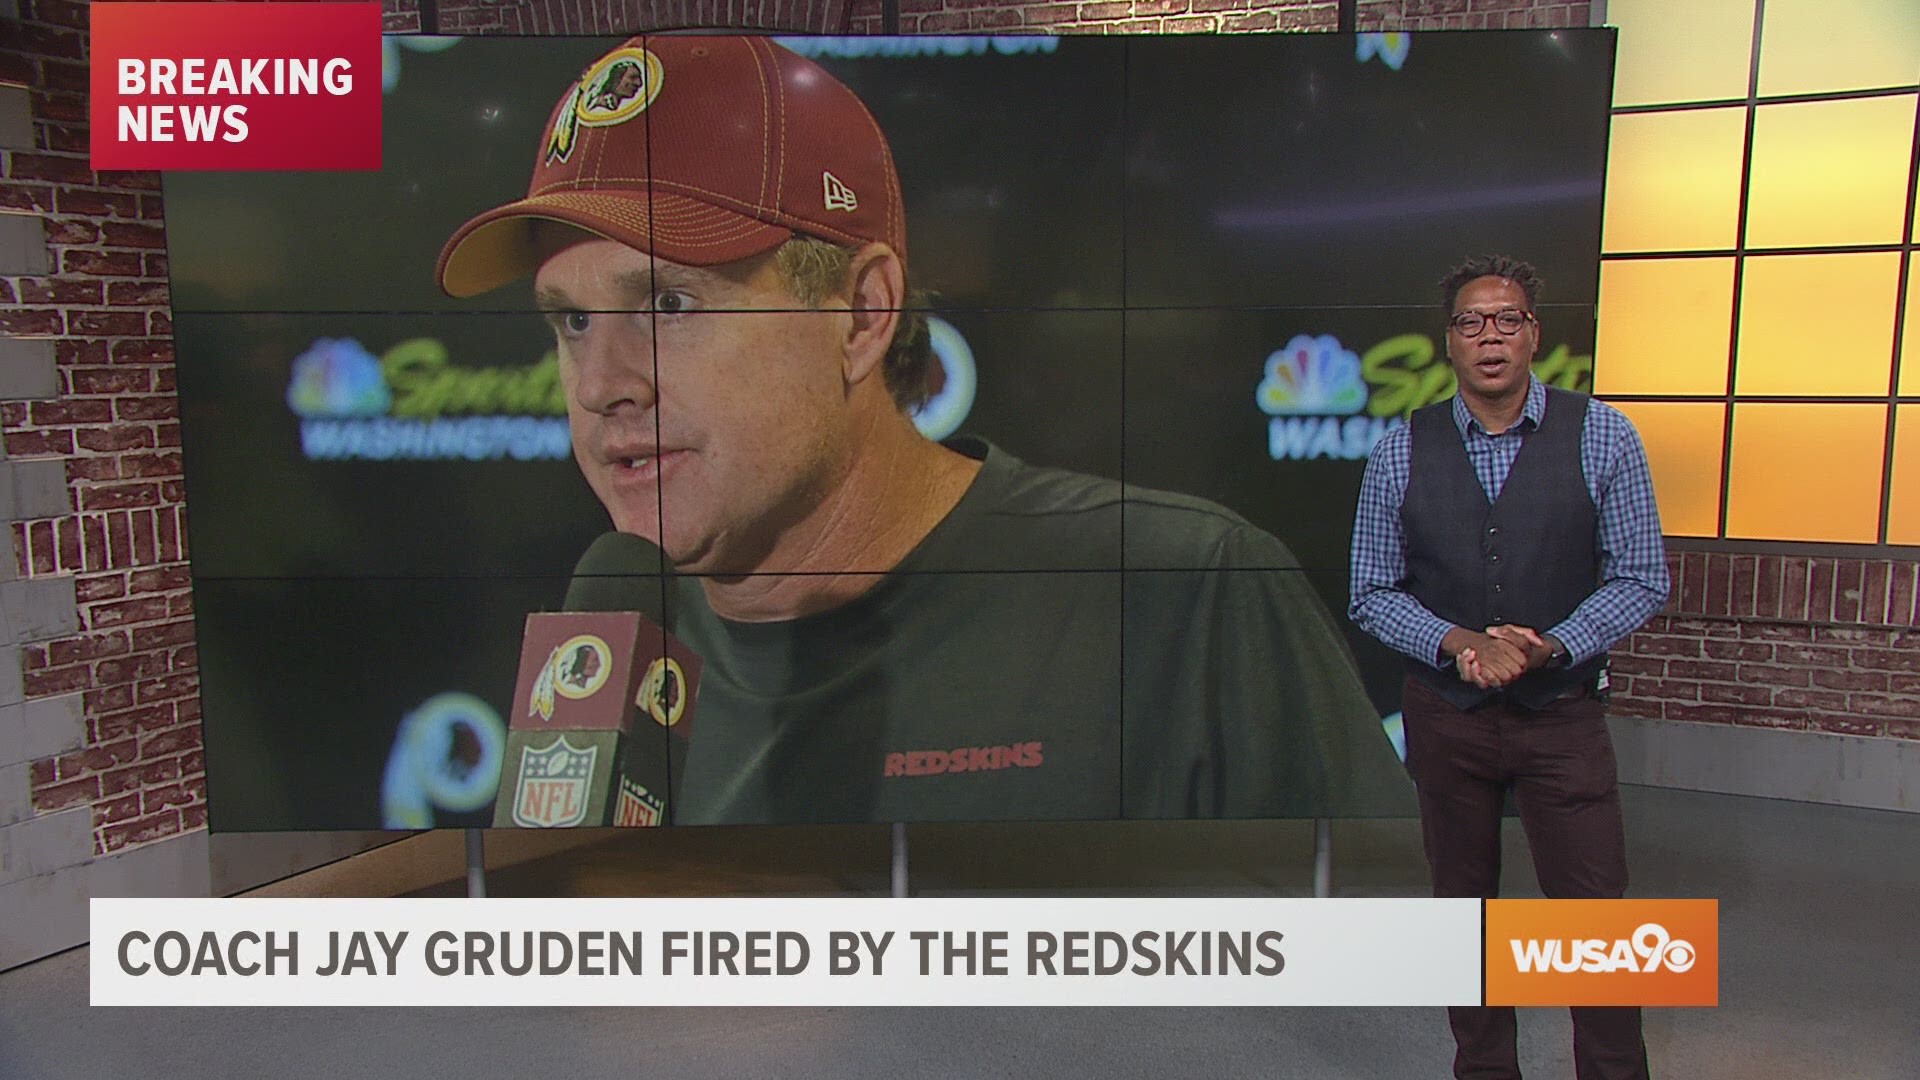 Redskins head coach Jay Gruden fired Monday morning. The team has not won a single game this season.